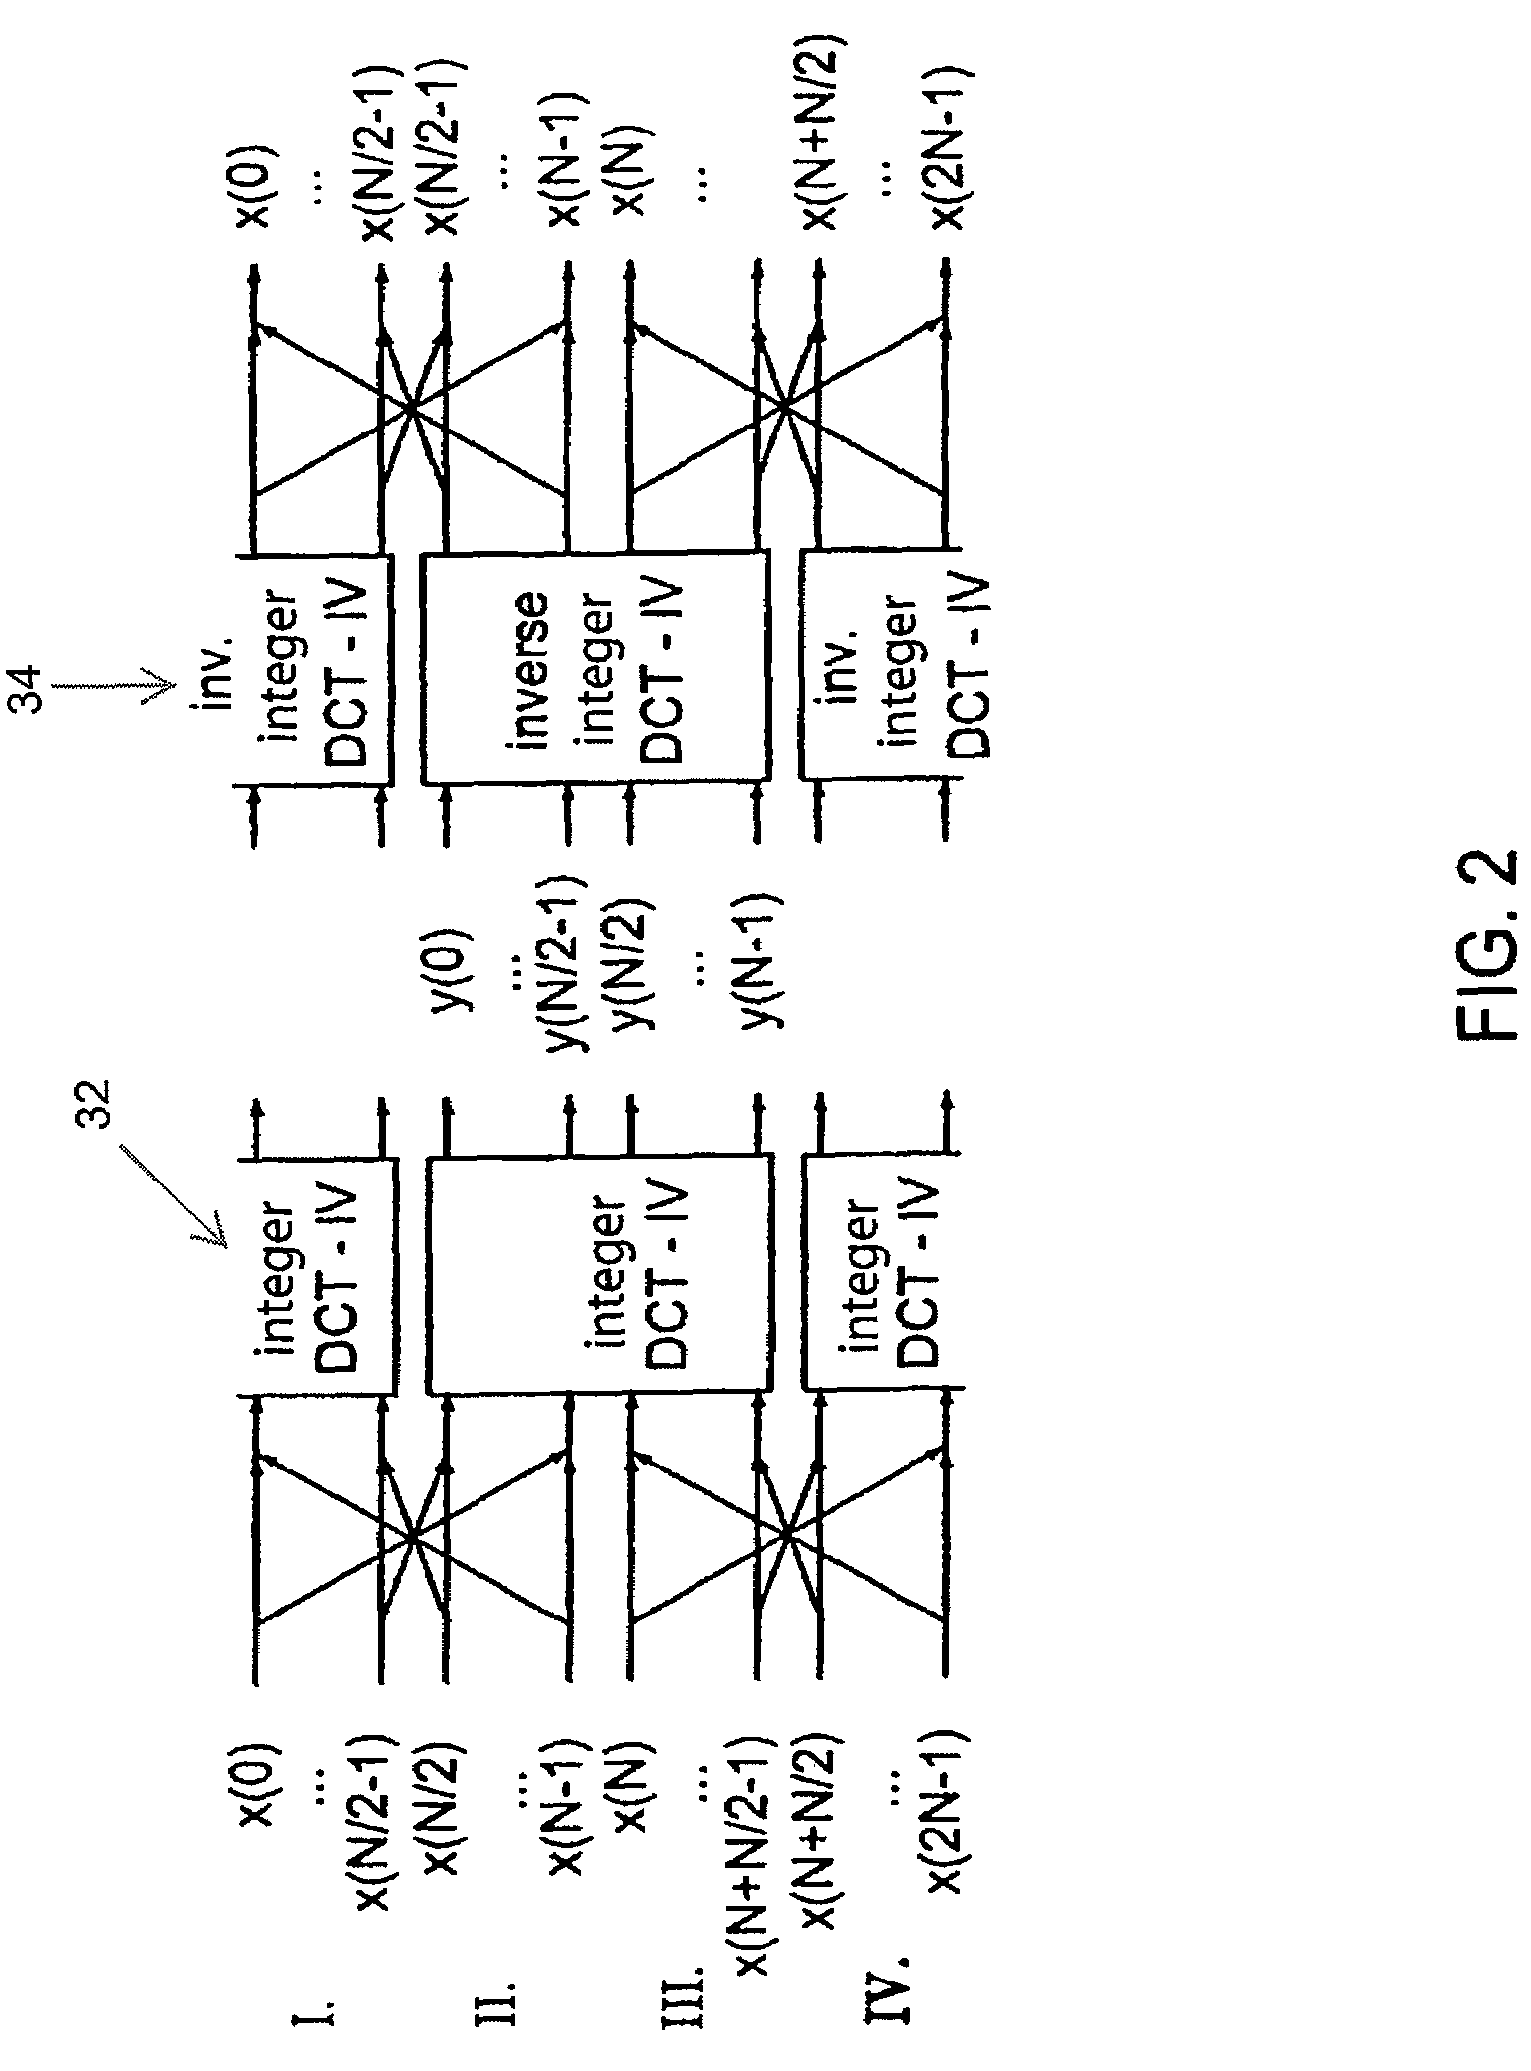 Method and apparatus for processing time-discrete audio sampled values